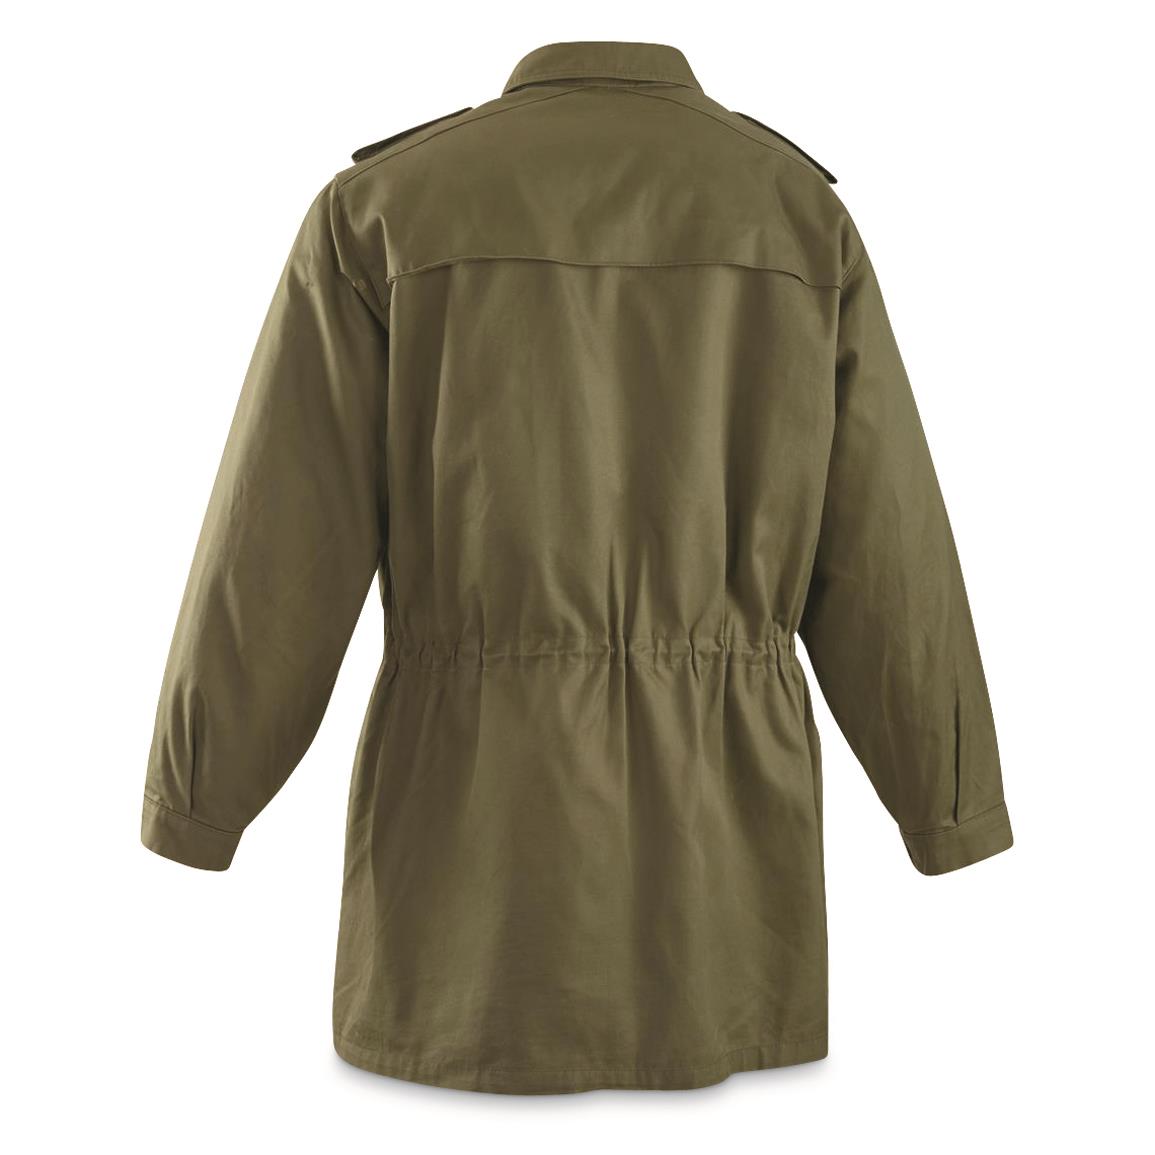 Brooklyn Armed Forces ECWCS Level 7 Type 2 Primaloft Parka - 584292,  Insulated Military Jackets at Sportsman's Guide